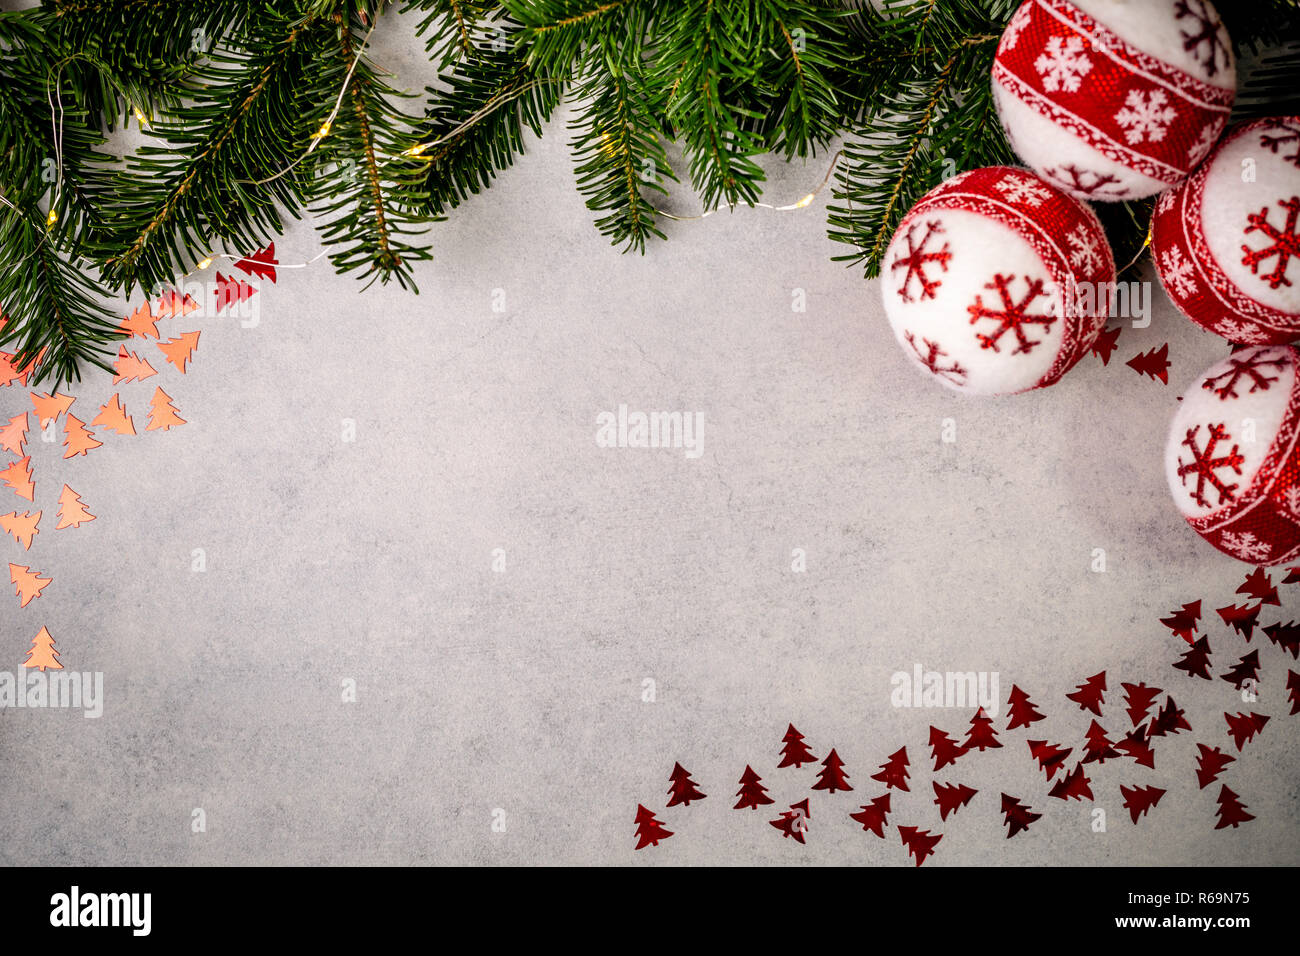 Christmas background with fir tree, red stars and christmass balls on gray concrete table. Top view with copy space. Stock Photo